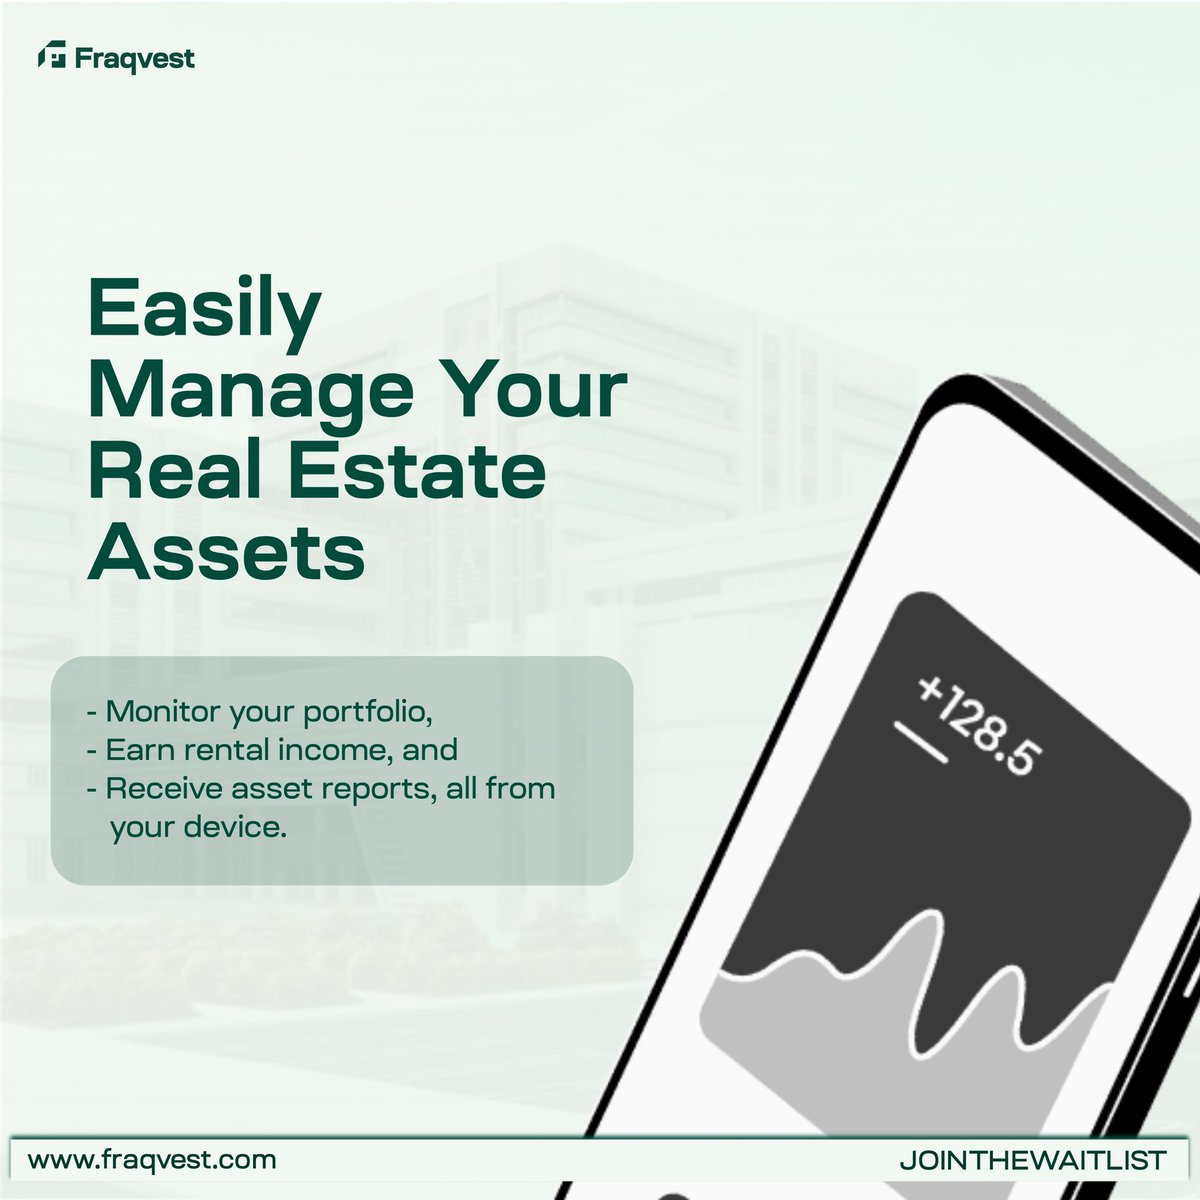 Fraqvest equips you with a platform that allows you seamlessly take control of your real estate assets.
All units carefully highlighted and managed.

Start your real estate journey owning units of highly profitable lands and properties.

Click the link in our bio to join the